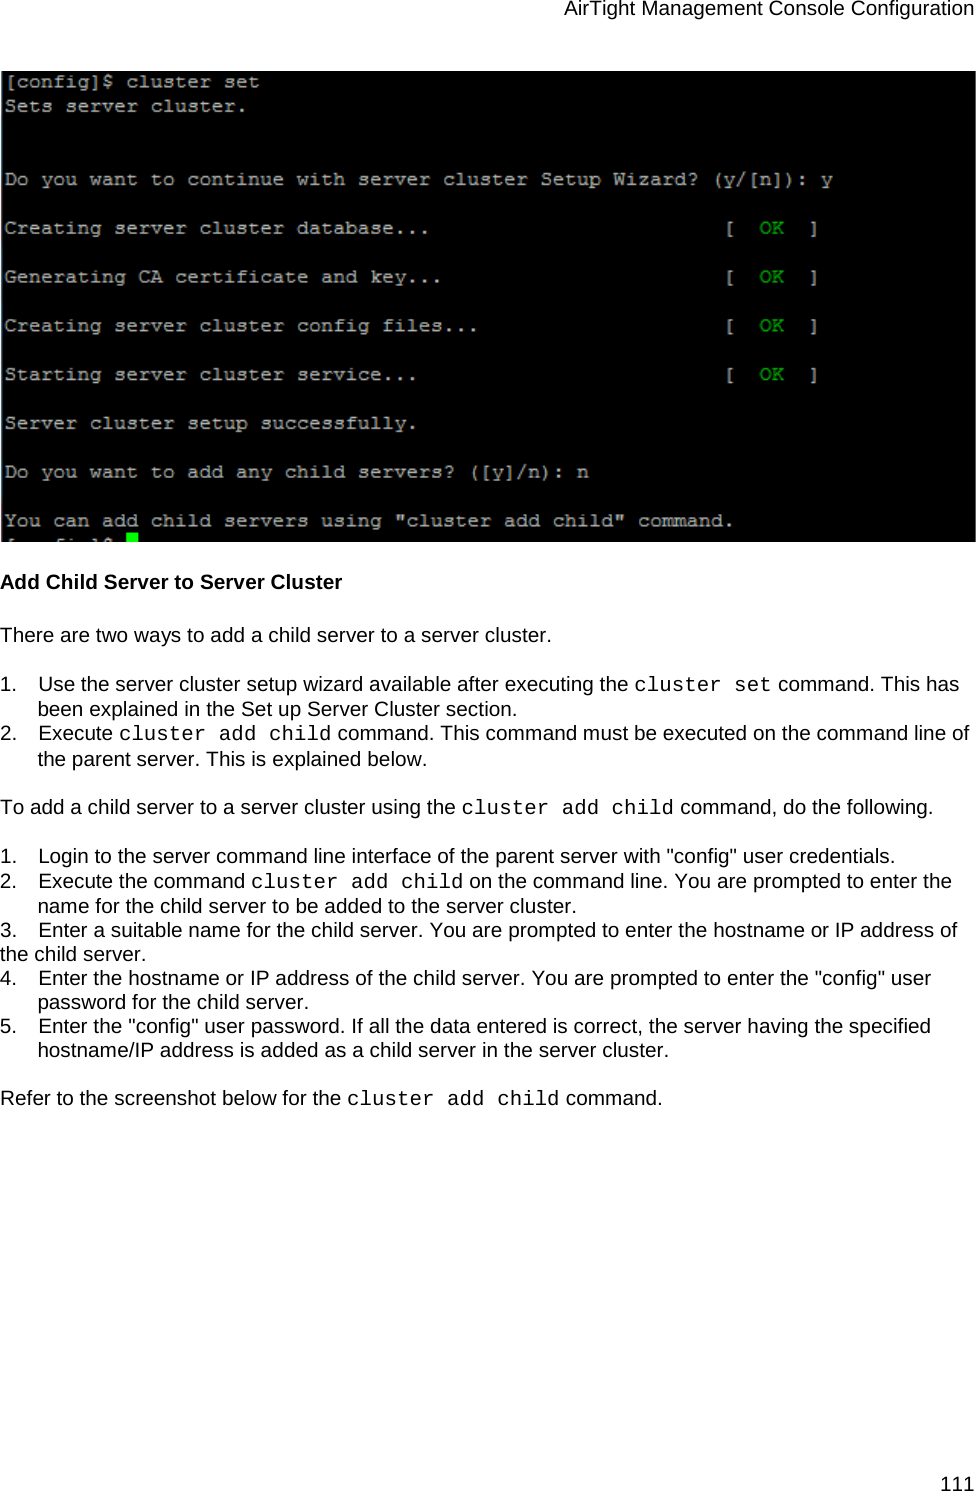 AirTight Management Console Configuration 111  Add Child Server to Server Cluster There are two ways to add a child server to a server cluster.   1.      Use the server cluster setup wizard available after executing the cluster set command. This has been explained in the Set up Server Cluster section. 2.      Execute cluster add child command. This command must be executed on the command line of the parent server. This is explained below.   To add a child server to a server cluster using the cluster add child command, do the following.   1.      Login to the server command line interface of the parent server with &quot;config&quot; user credentials. 2.      Execute the command cluster add child on the command line. You are prompted to enter the name for the child server to be added to the server cluster. 3.      Enter a suitable name for the child server. You are prompted to enter the hostname or IP address of the child server. 4.      Enter the hostname or IP address of the child server. You are prompted to enter the &quot;config&quot; user password for the child server. 5.      Enter the &quot;config&quot; user password. If all the data entered is correct, the server having the specified hostname/IP address is added as a child server in the server cluster.    Refer to the screenshot below for the cluster add child command.   